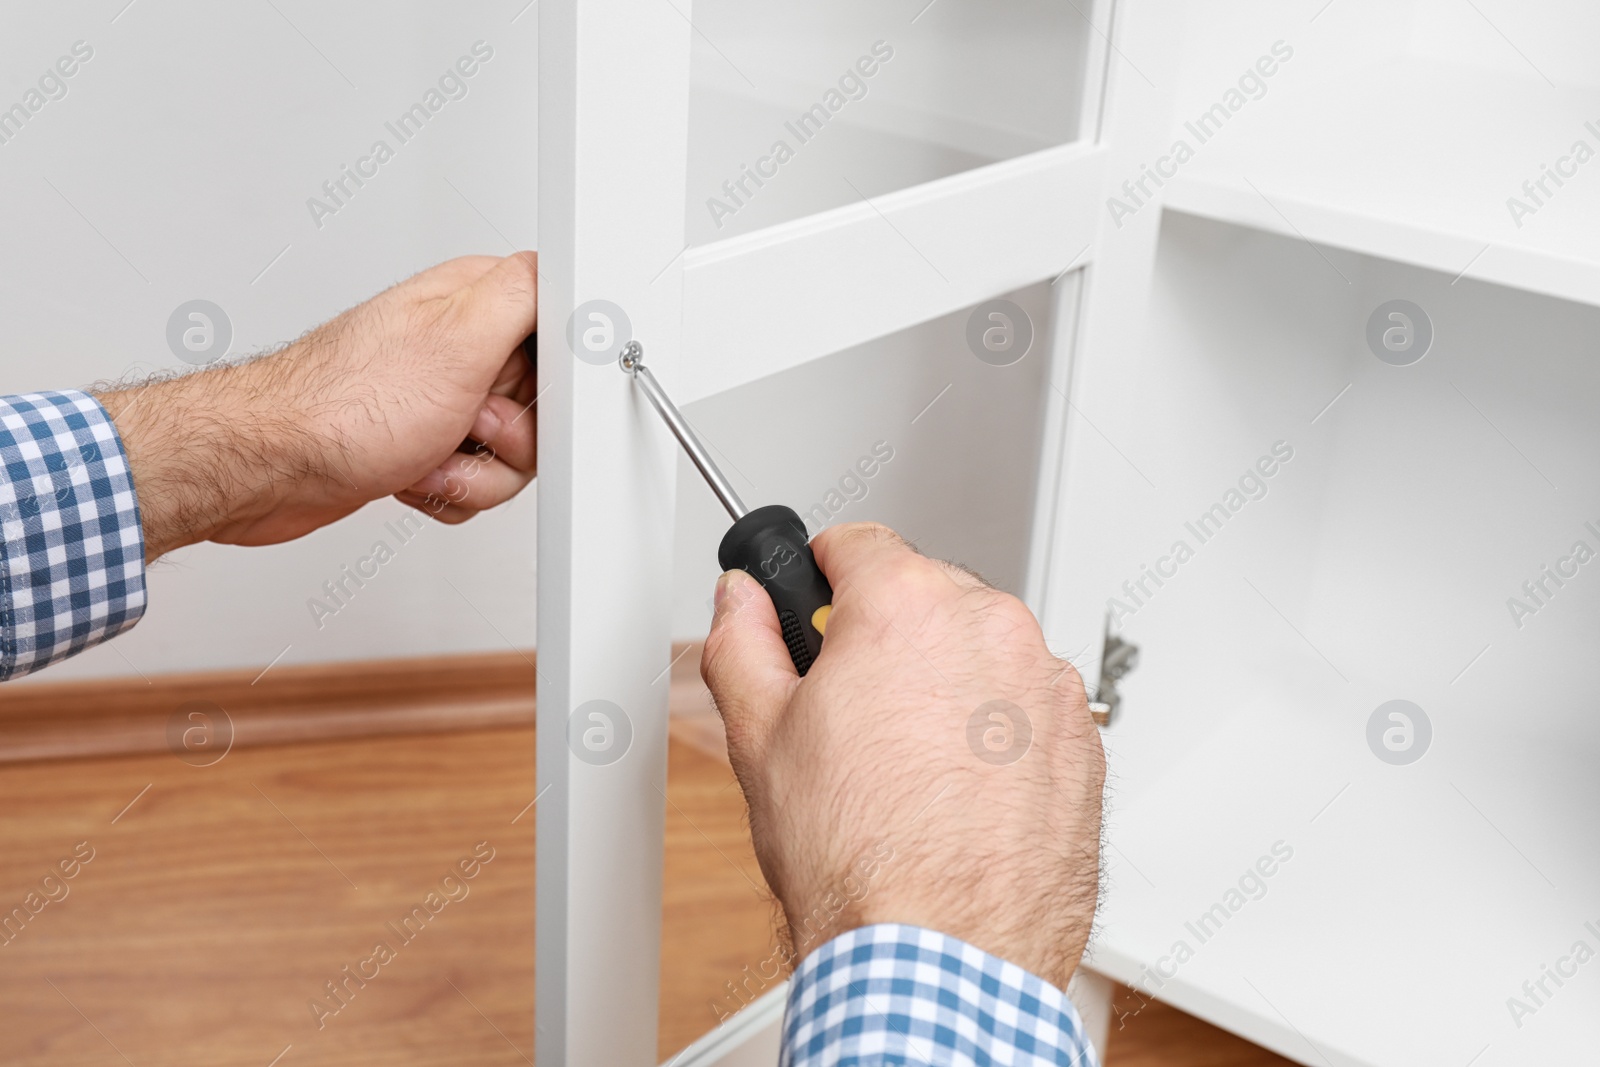 Photo of Man fixing handle of wooden cabinet, closeup view